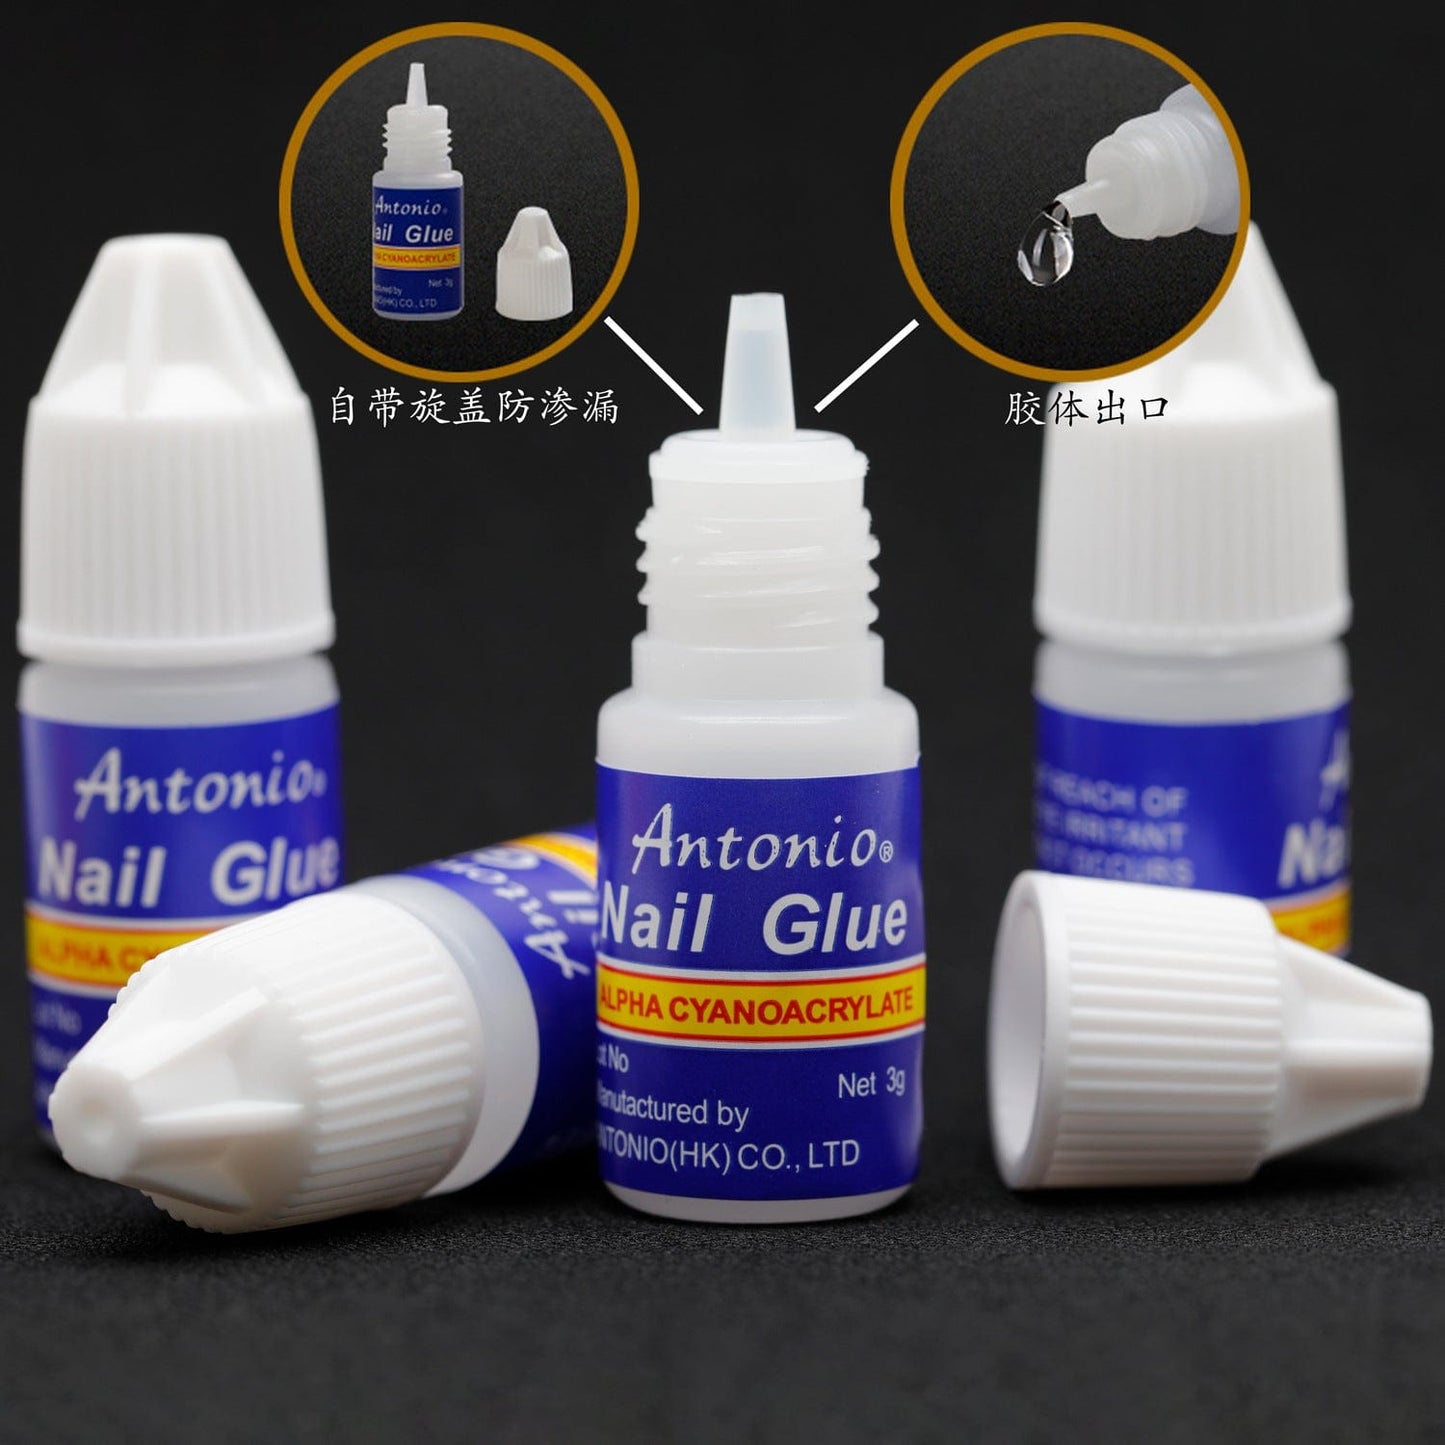 Supply cross-border nail supplies wholesale native water 3g nail glue blue bottle fake pieces special glue